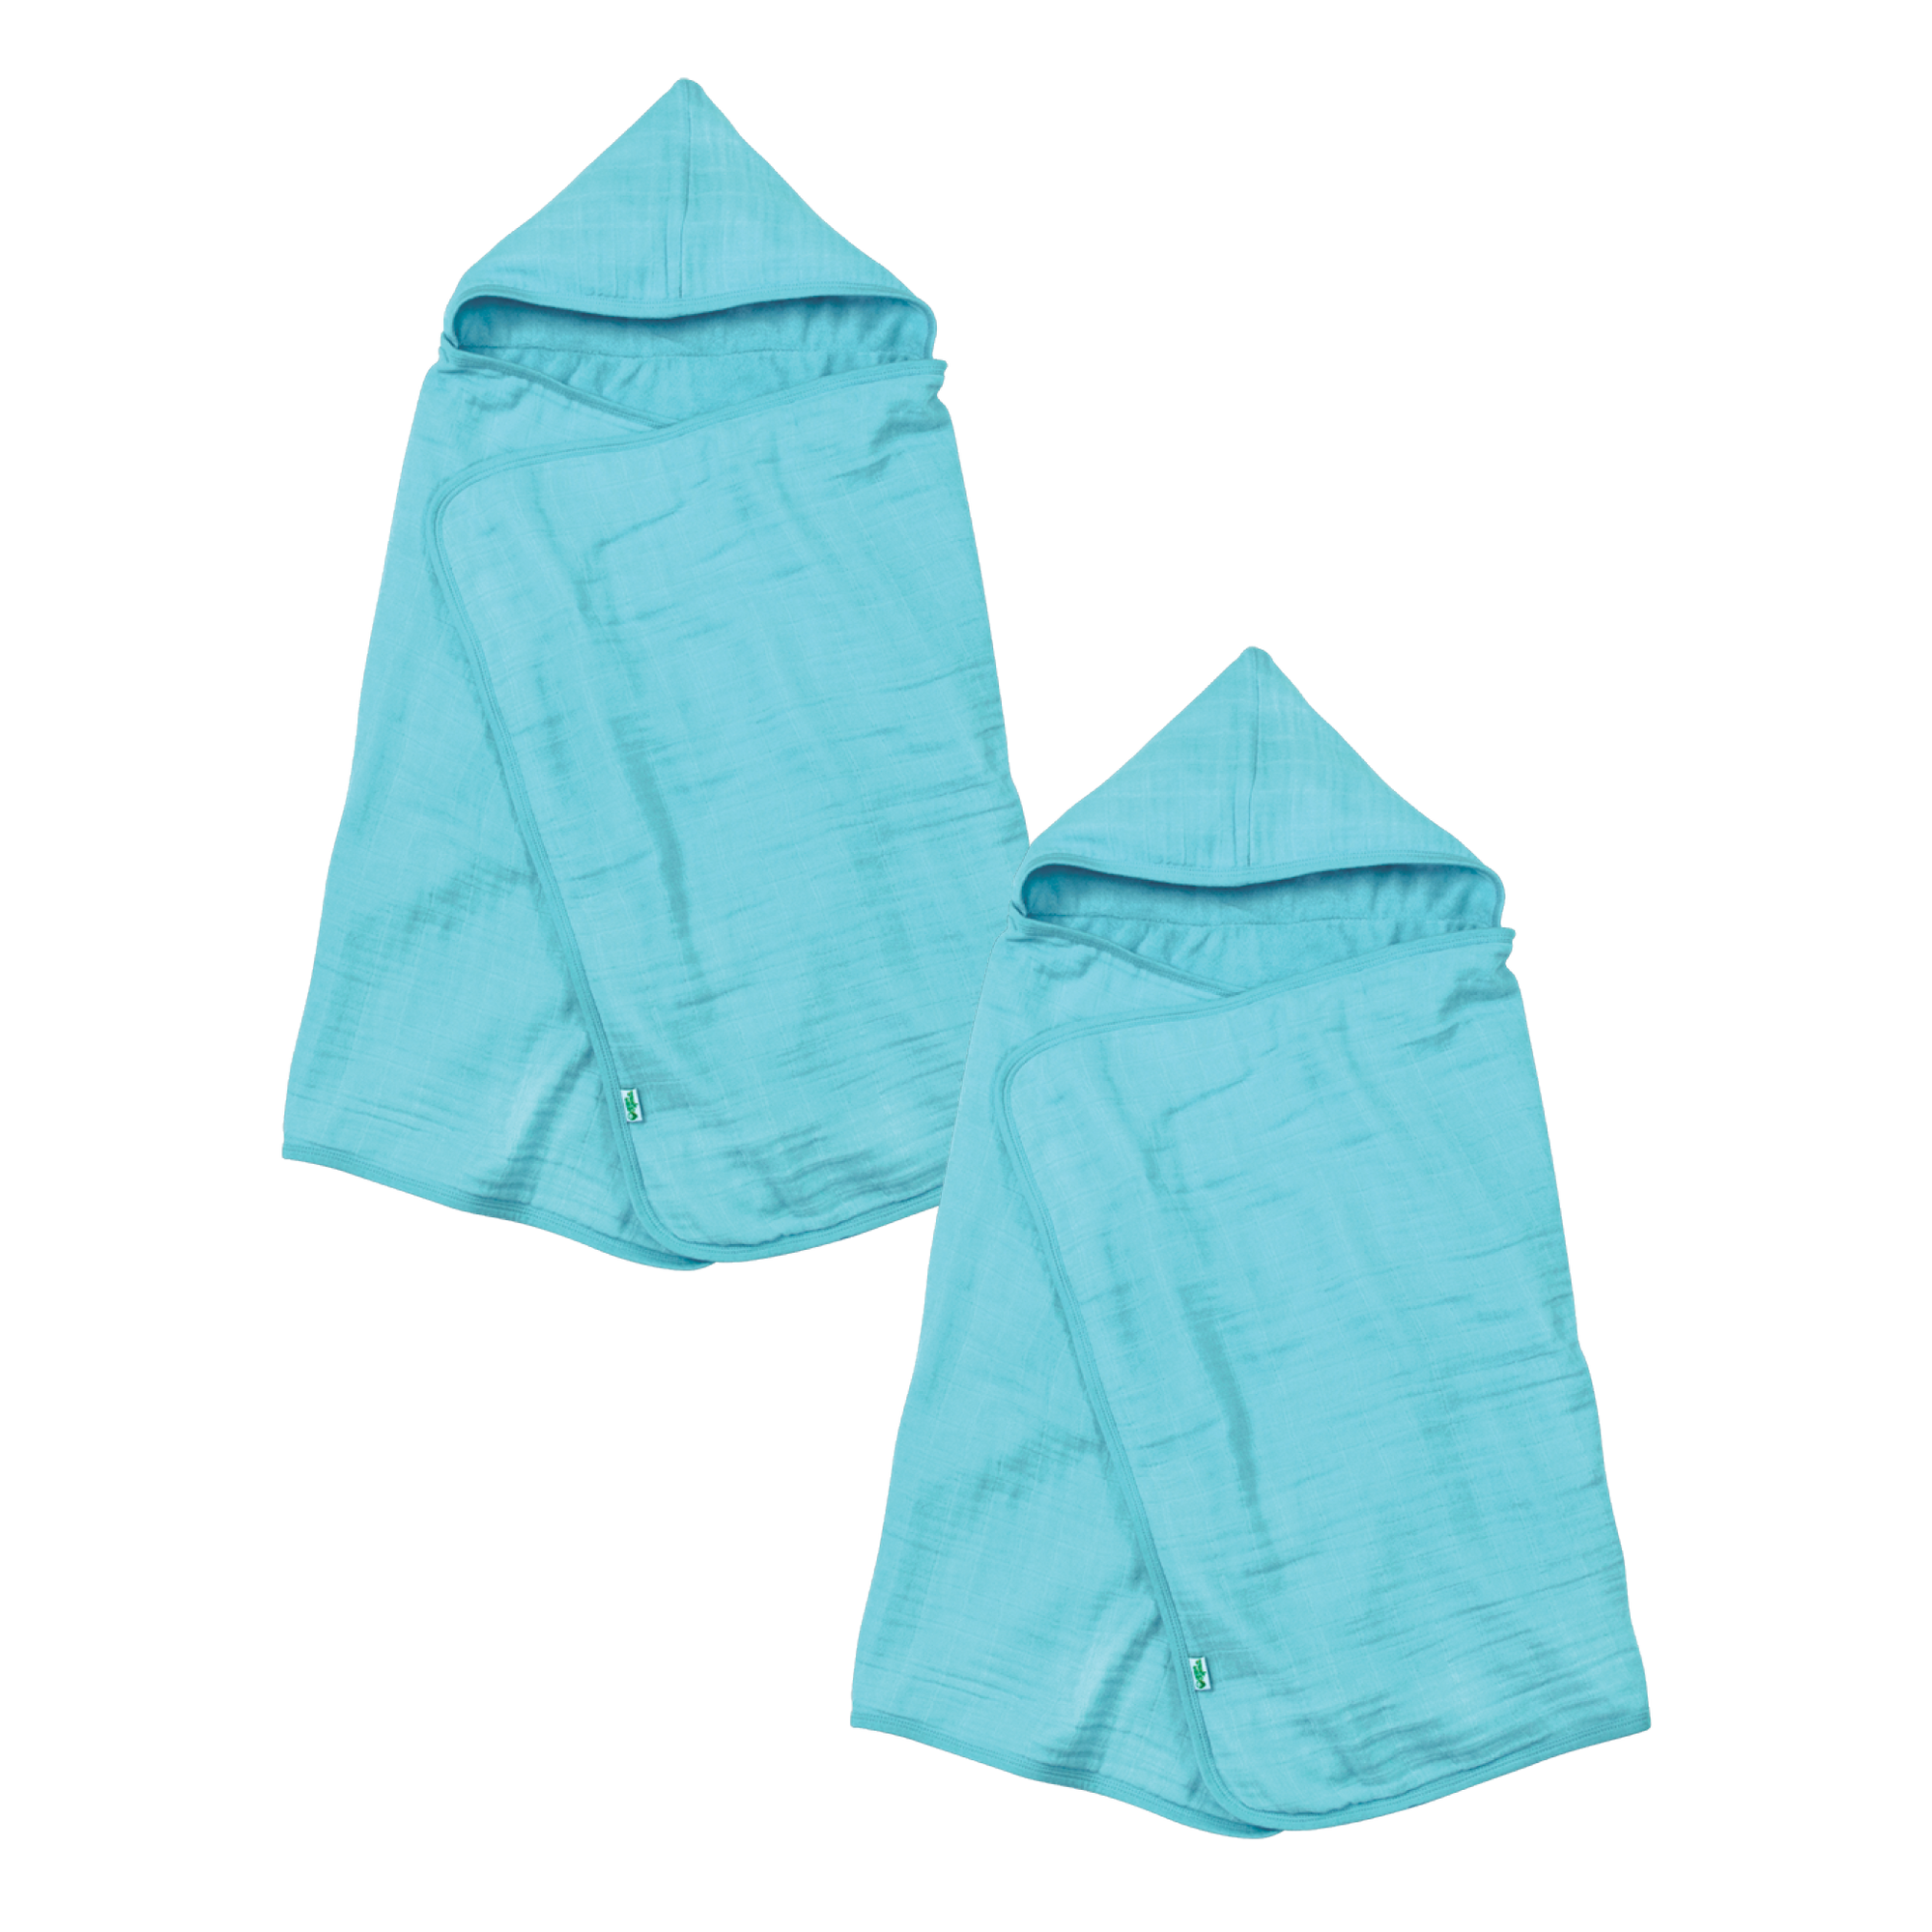 Muslin Hooded Towel made from Organic Cotton (2 pack)